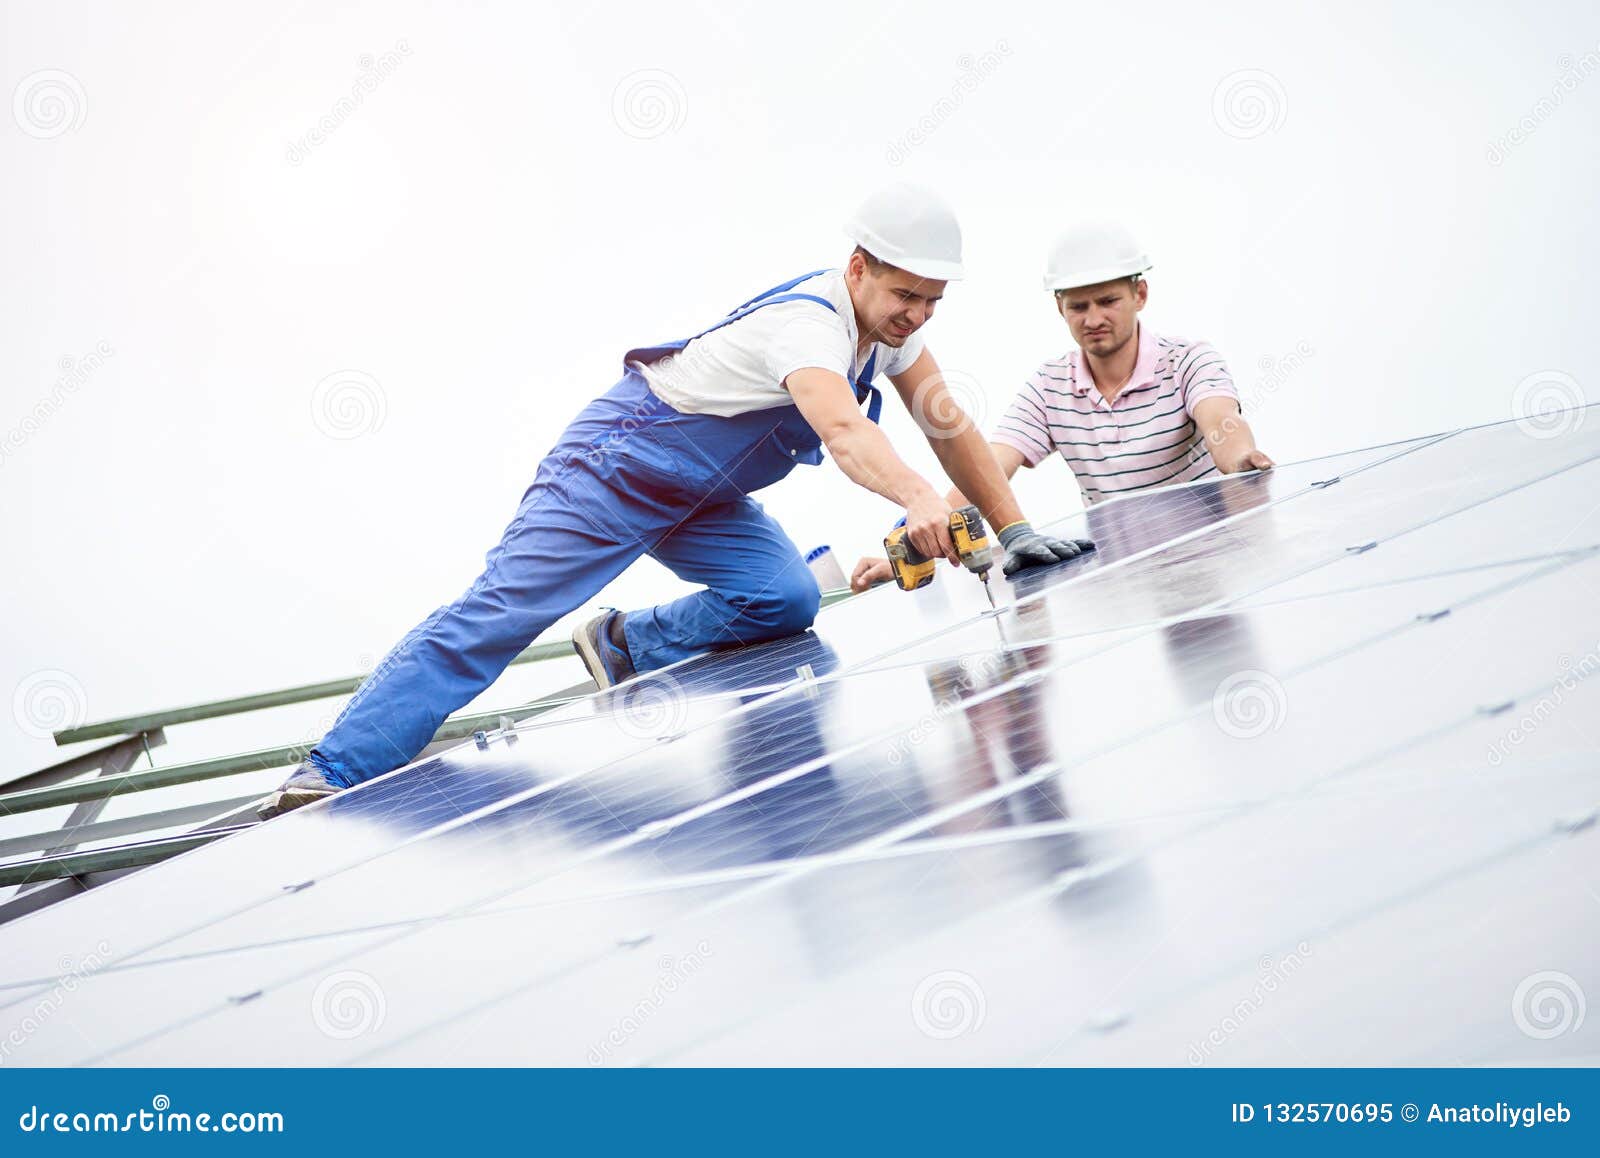 installing of solar photo voltaic panel system